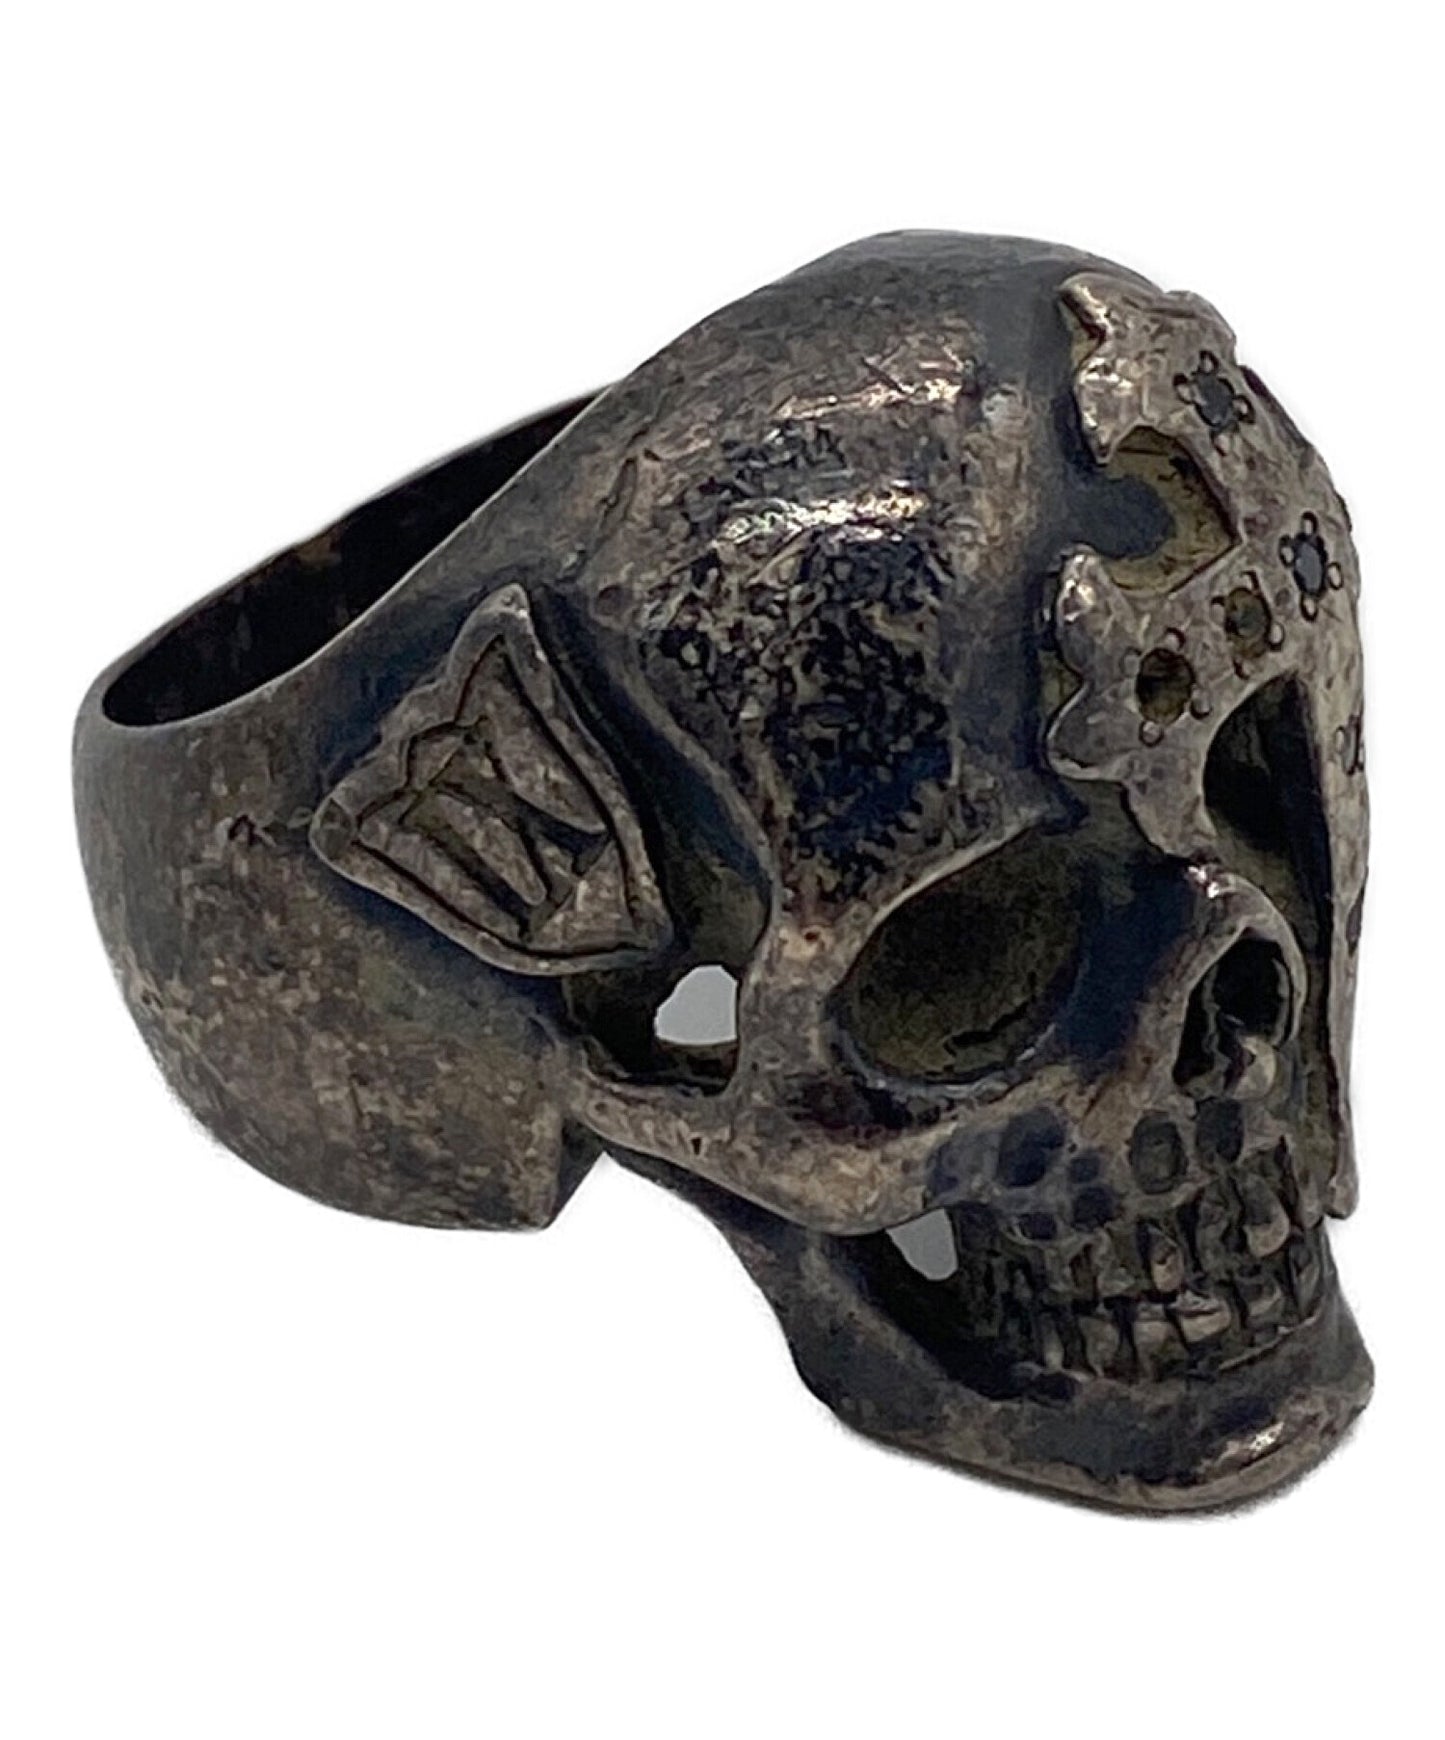 [Pre-owned] NUMBER (N)INE×Magical Design 06AW skull ring NM-S5001A